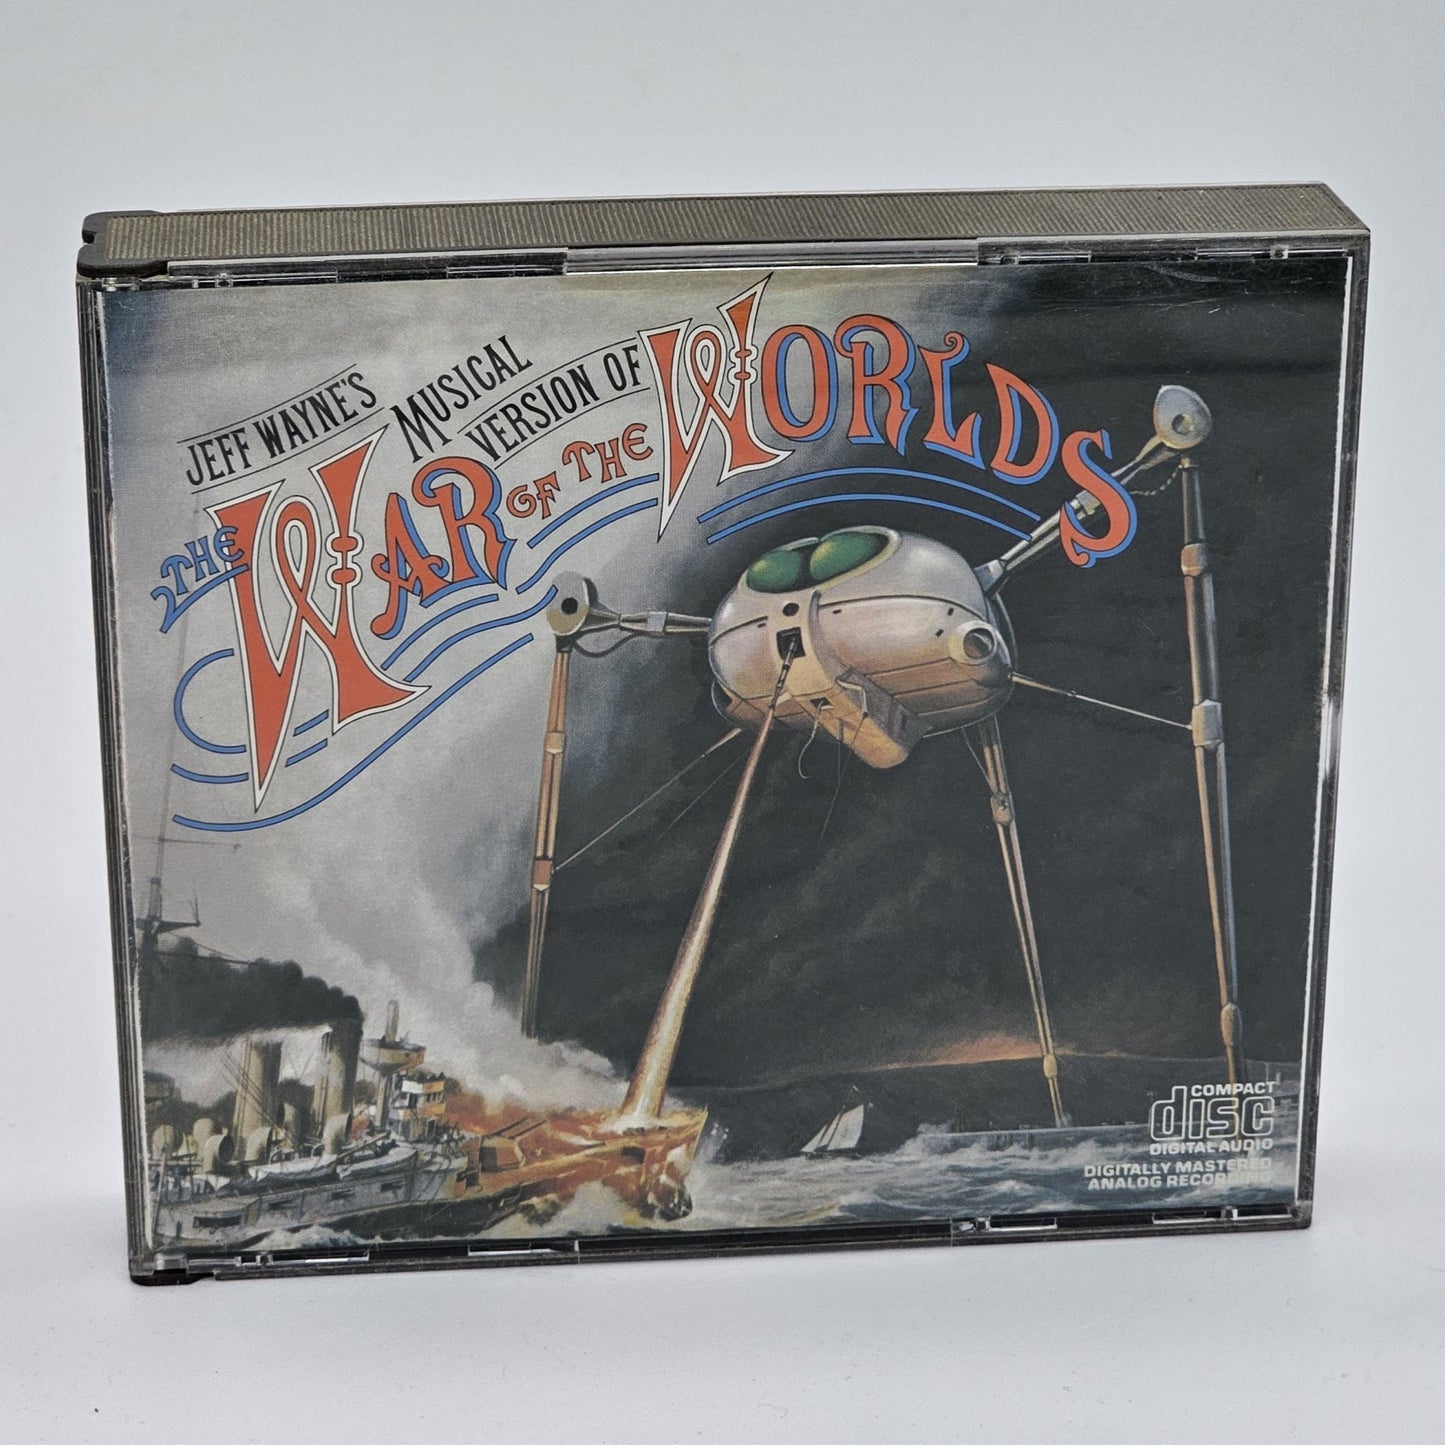 Columbia Records - Jeff Wayne | Musical Version Of The War Of The World | 2 CD Set - Compact Disc - Steady Bunny Shop